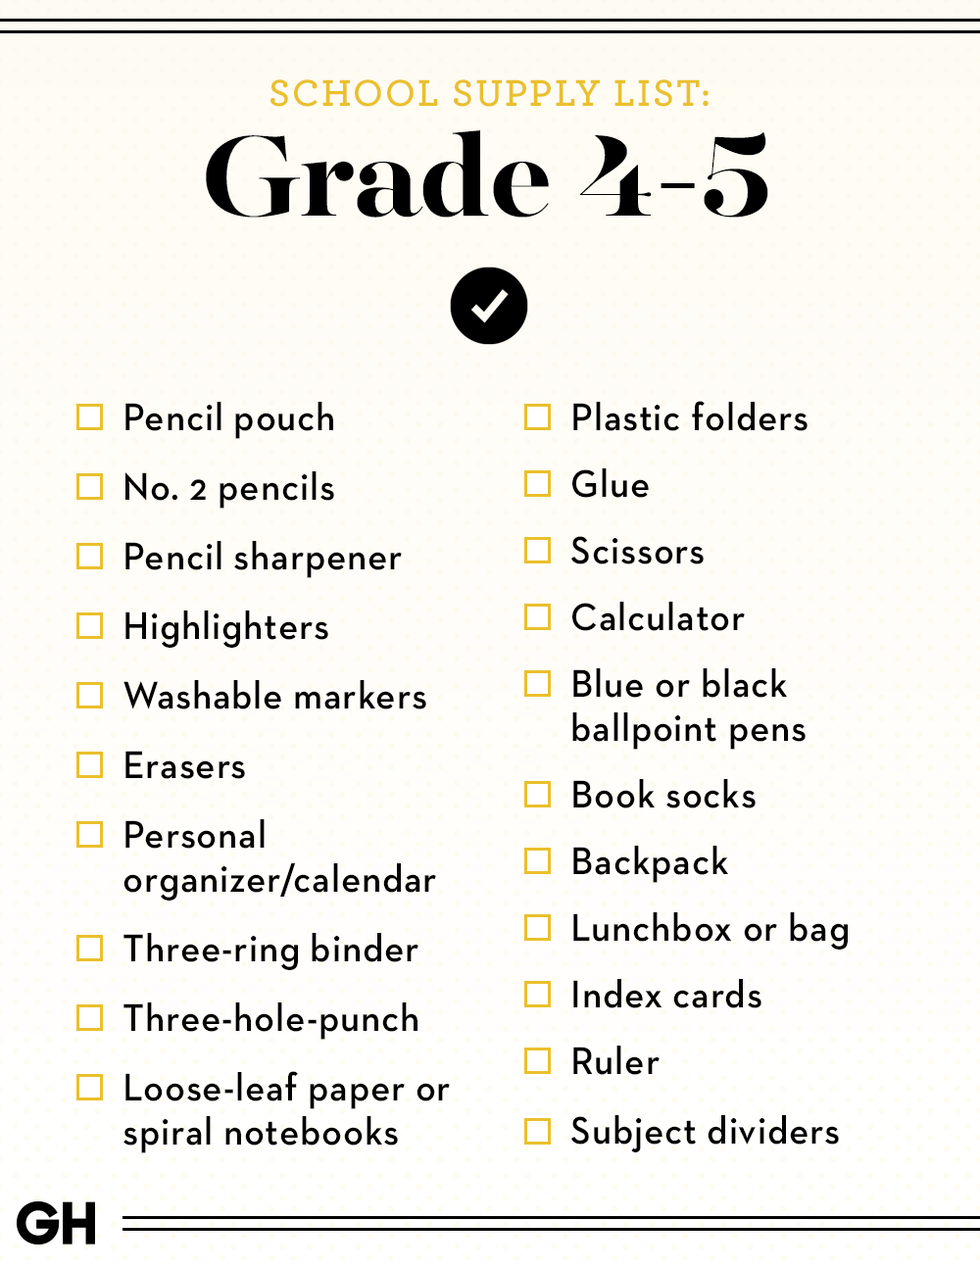 https://hips.hearstapps.com/hmg-prod/images/back-to-school-checklists-grade4-5-1558037185.png?crop=1xw:1xh;center,top&resize=980:*